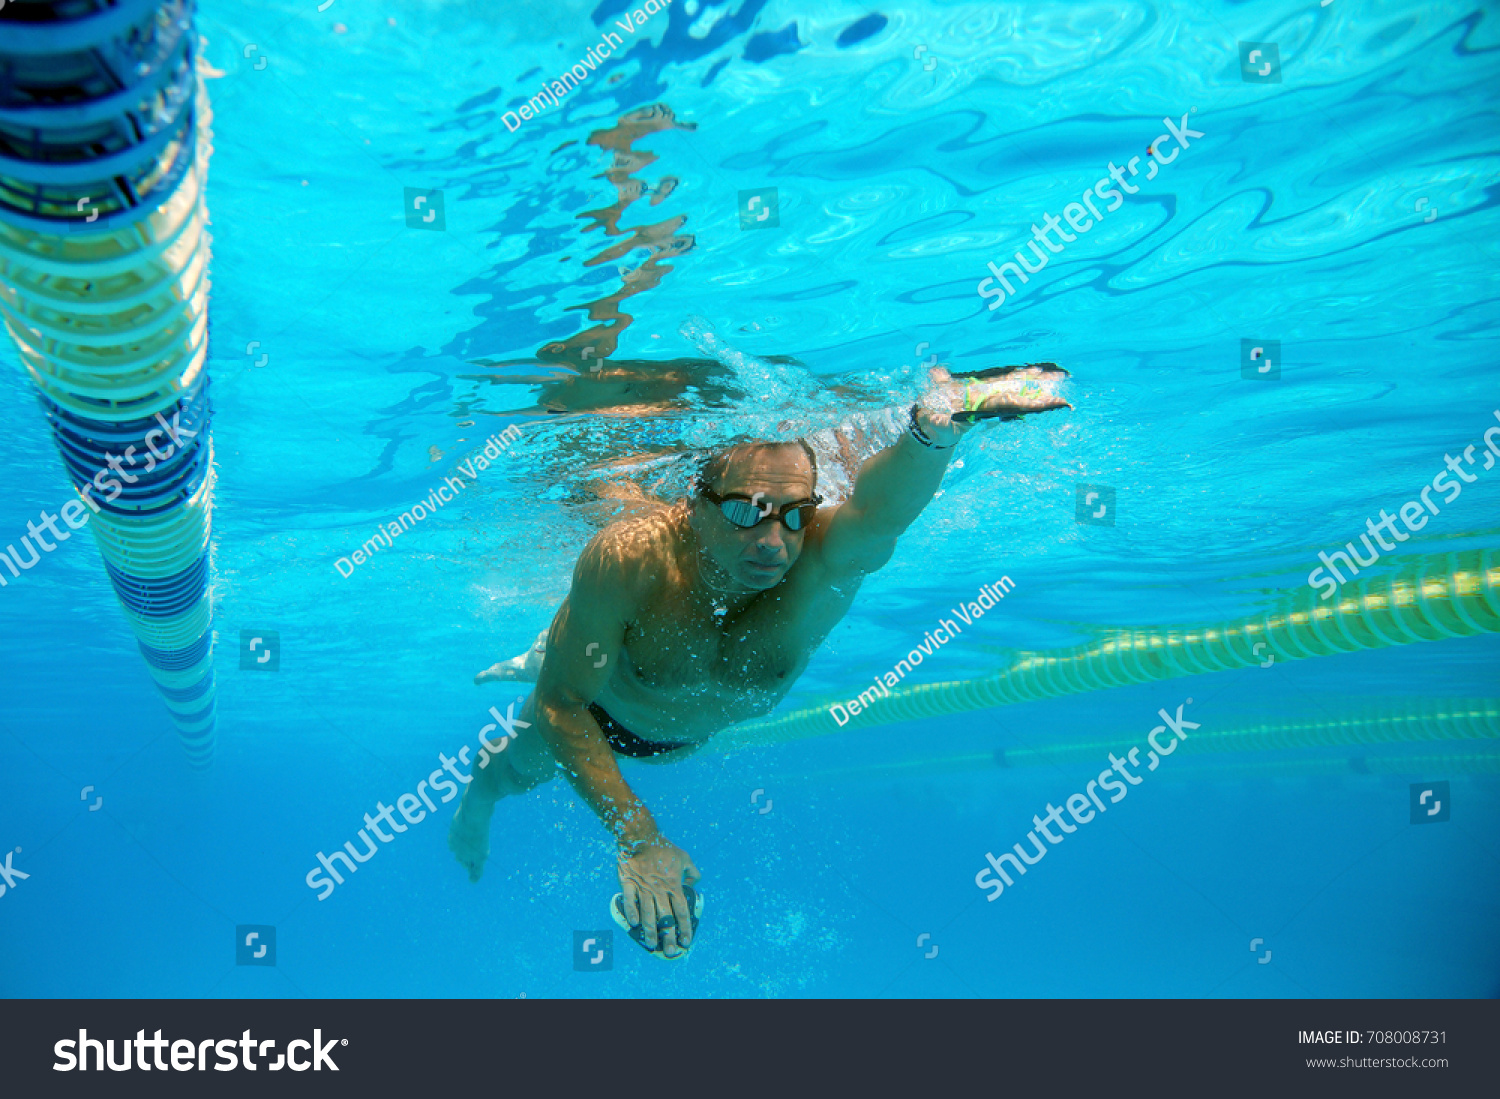 Swimmer in the big outdoor swimming pool #708008731